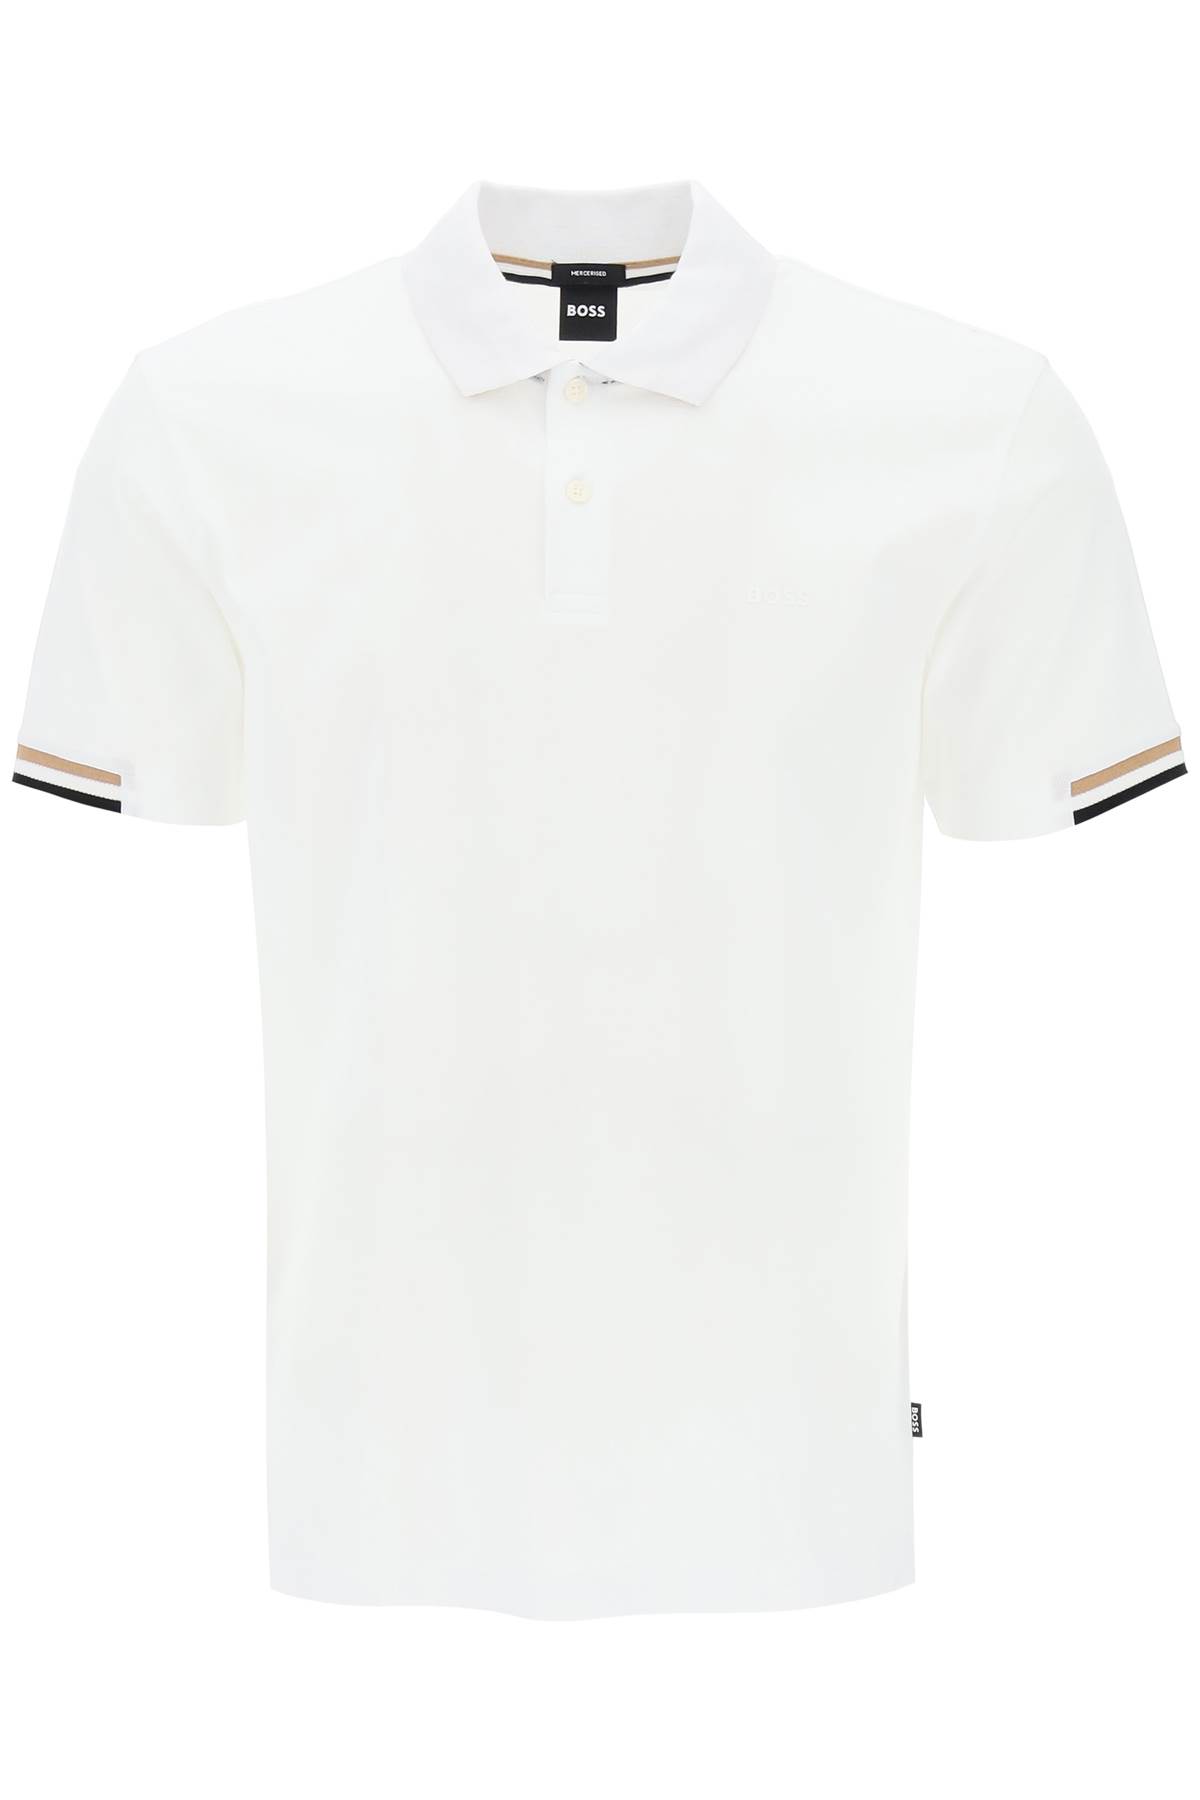 HUGO BOSS PARLAY POLO SHIRT WITH STRIPE DETAIL